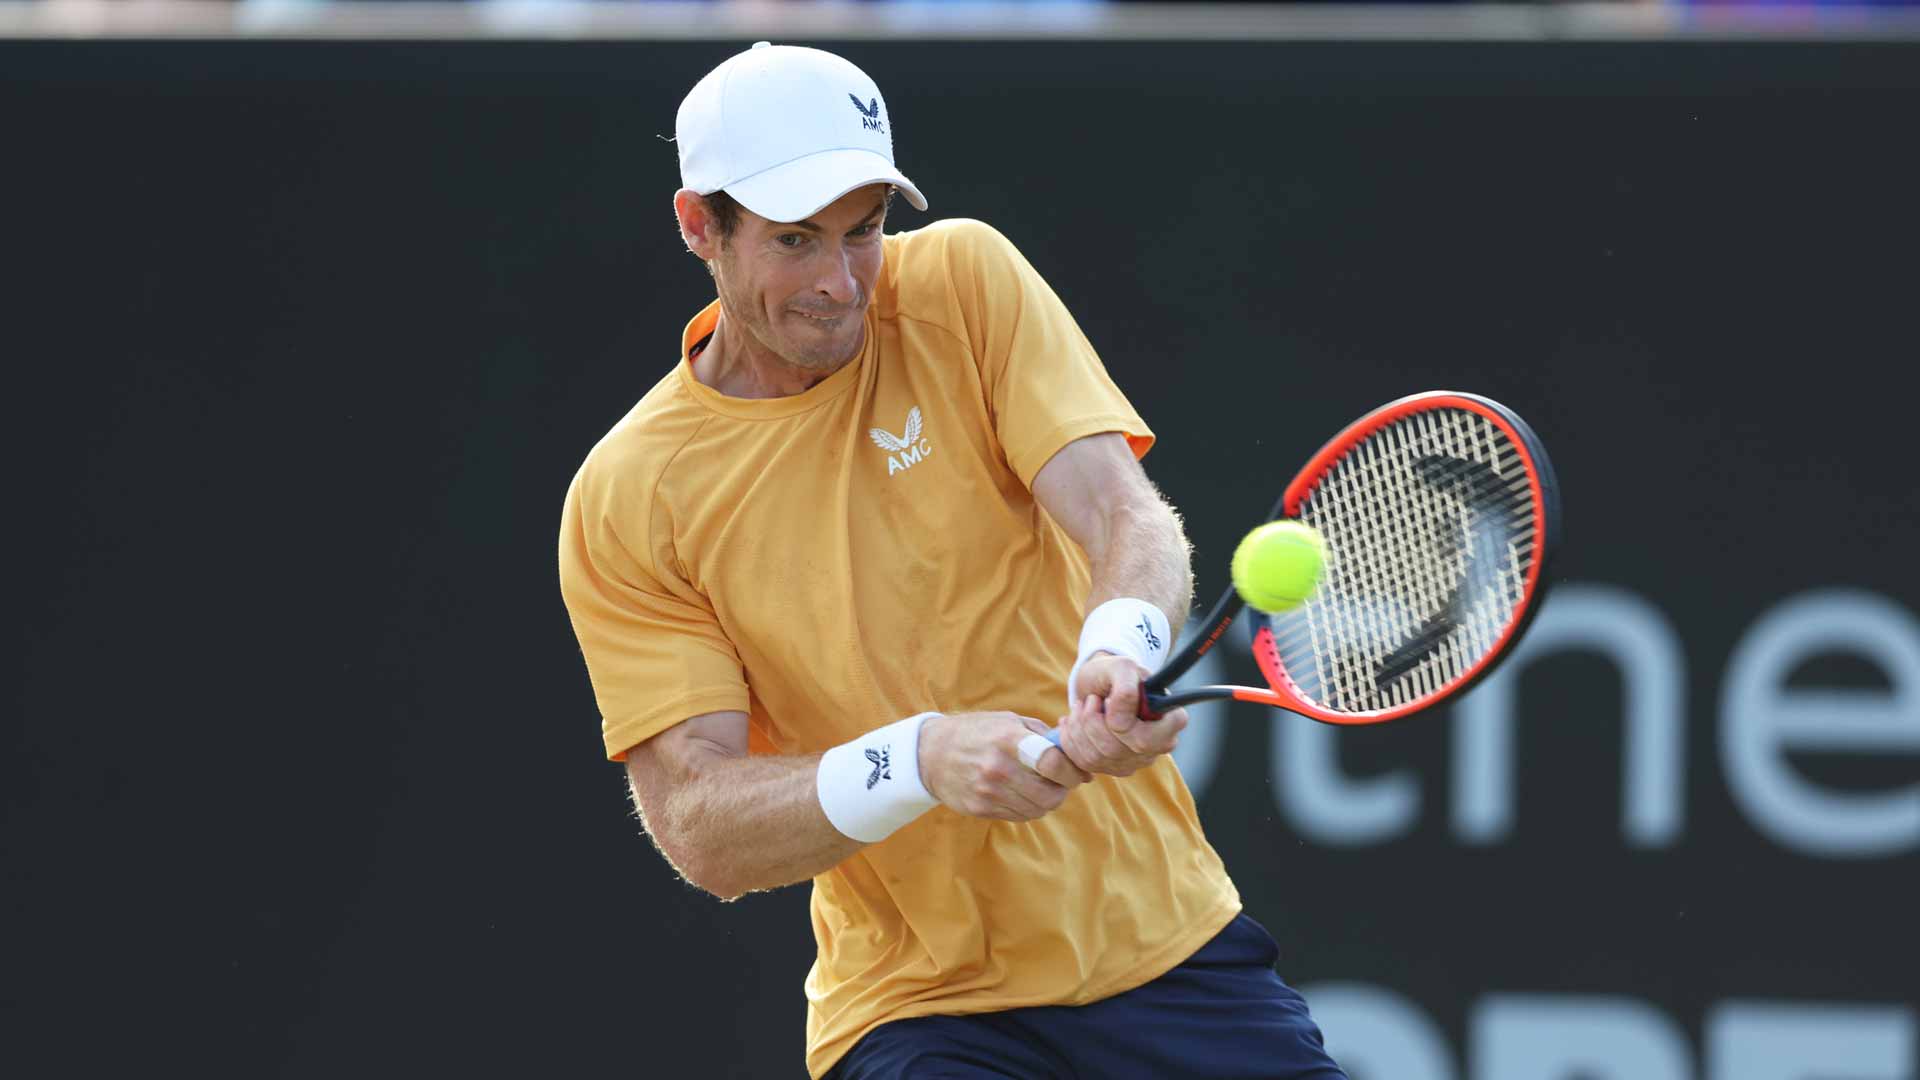 Andy Murray in action at the Rothesay Open.